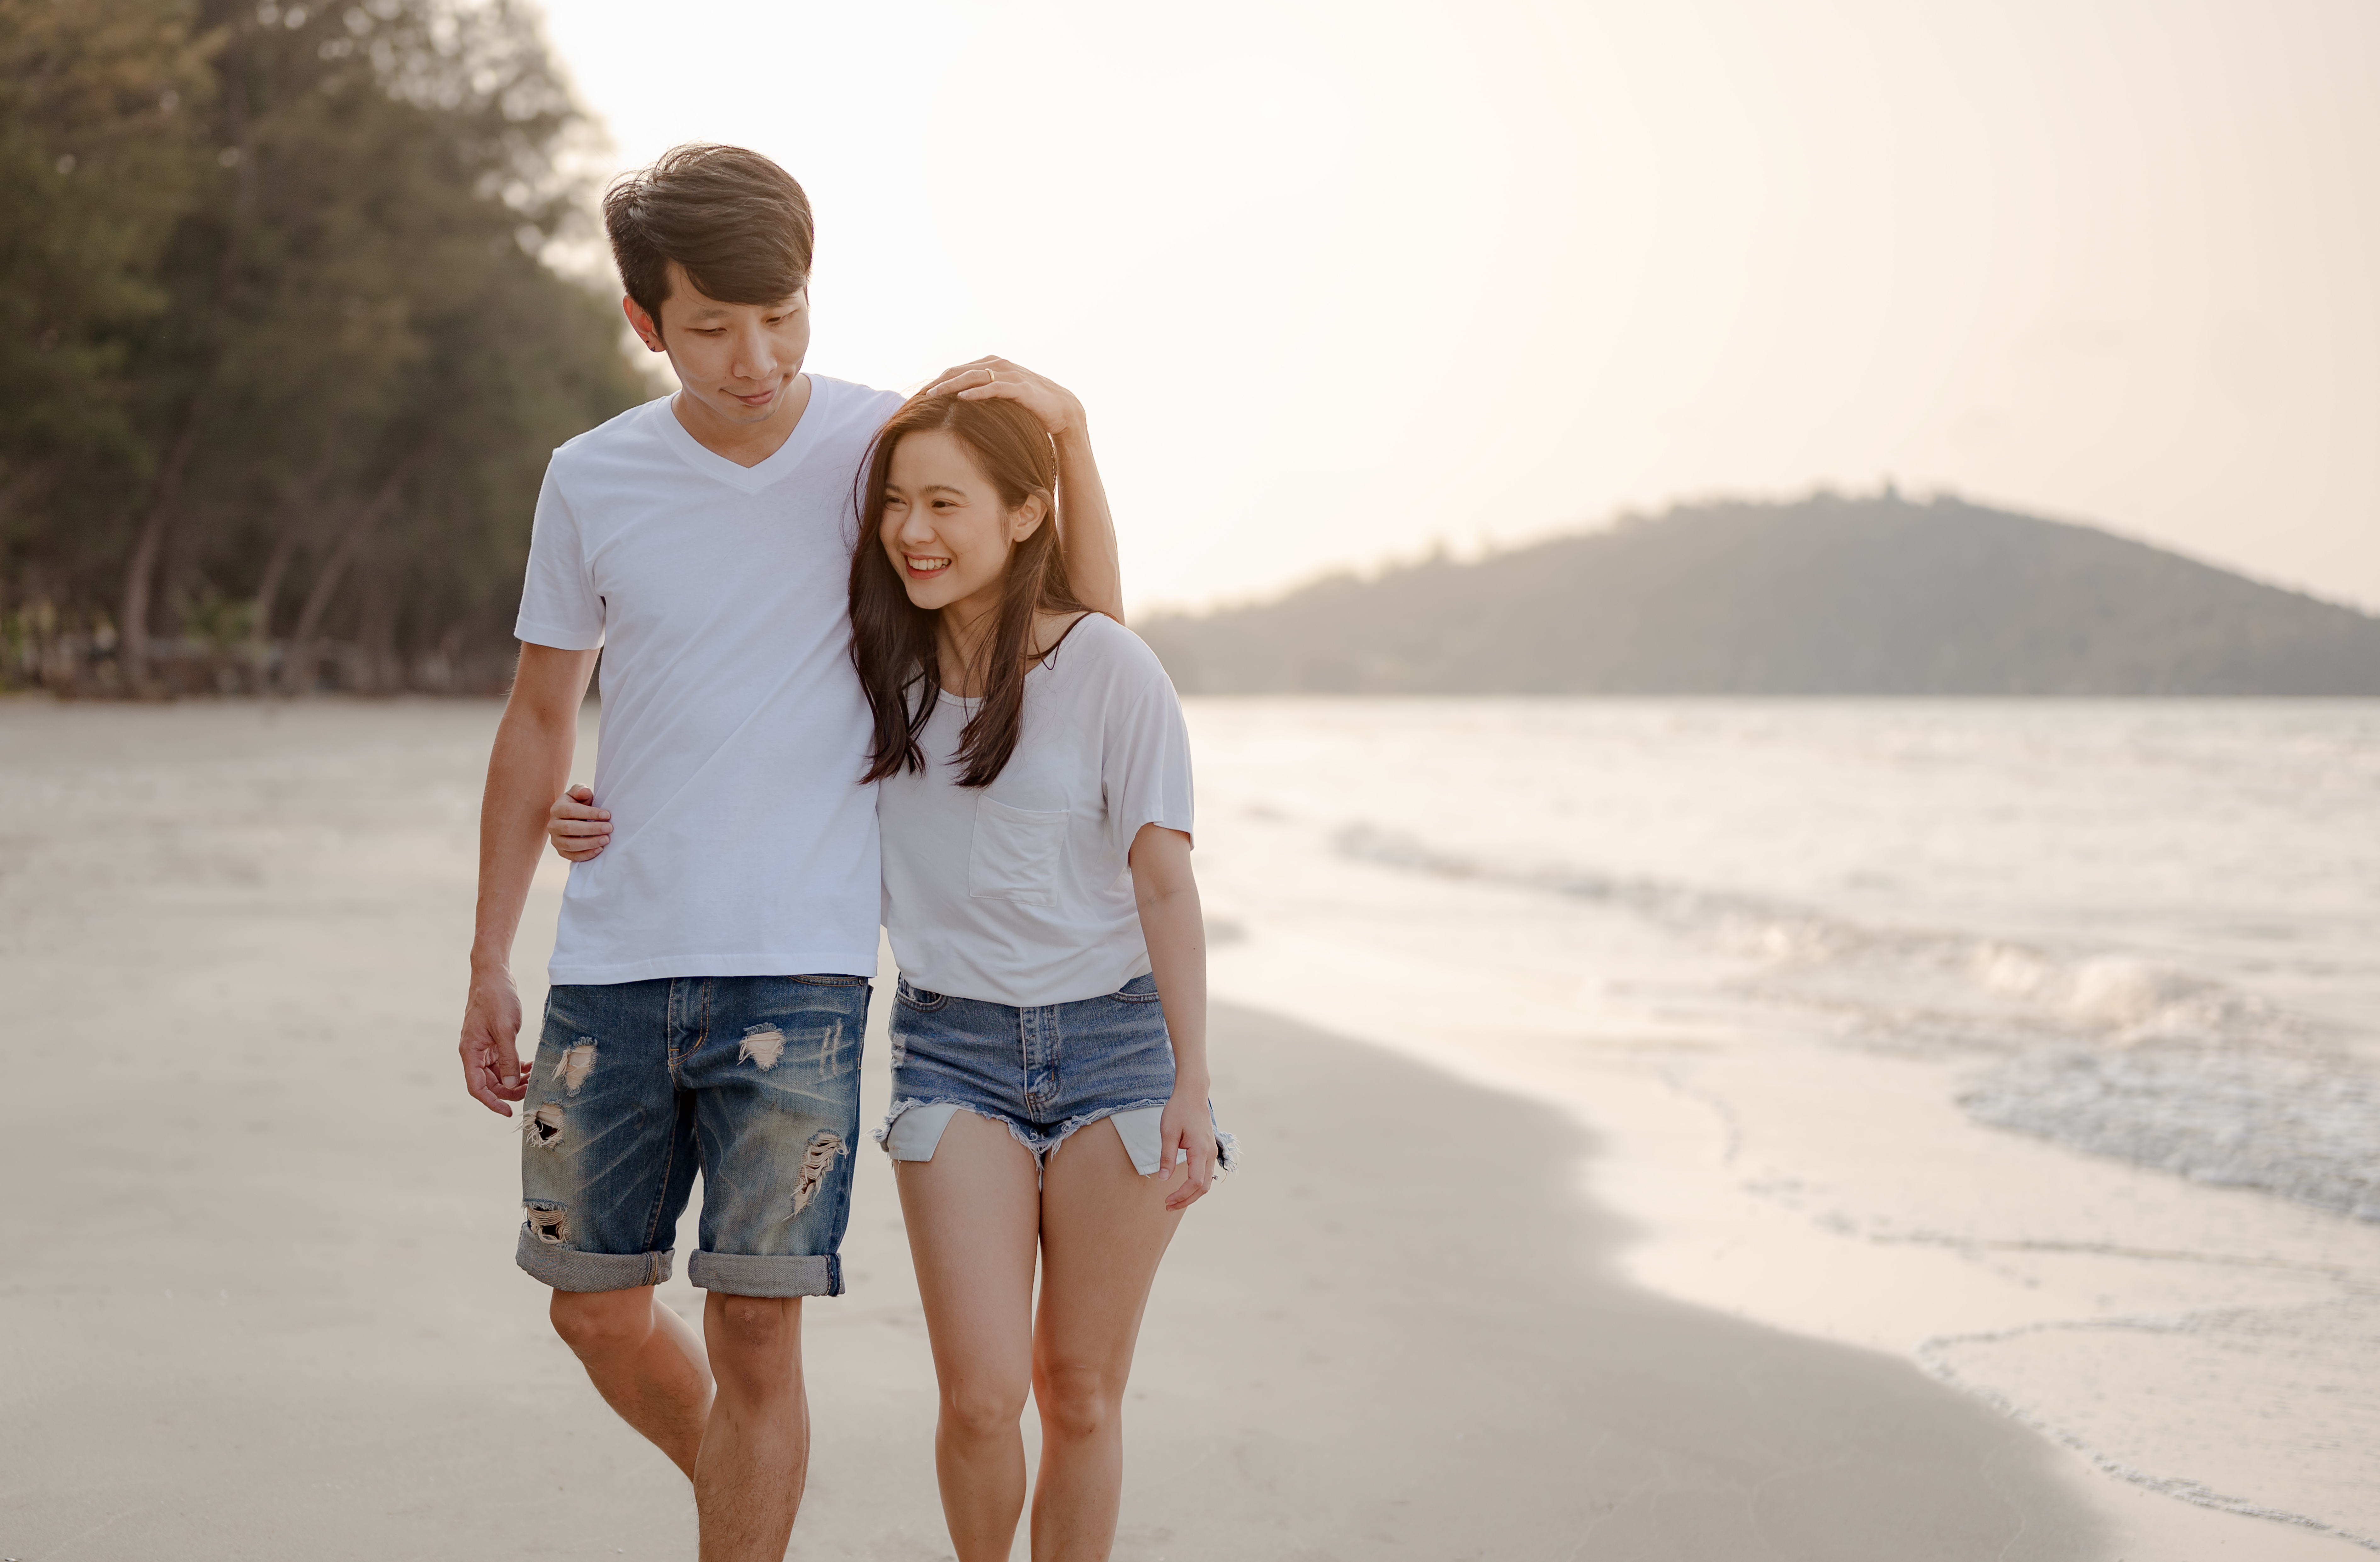 Romantic couple walking hugging each other while at beach at sunrise, plan life insurance